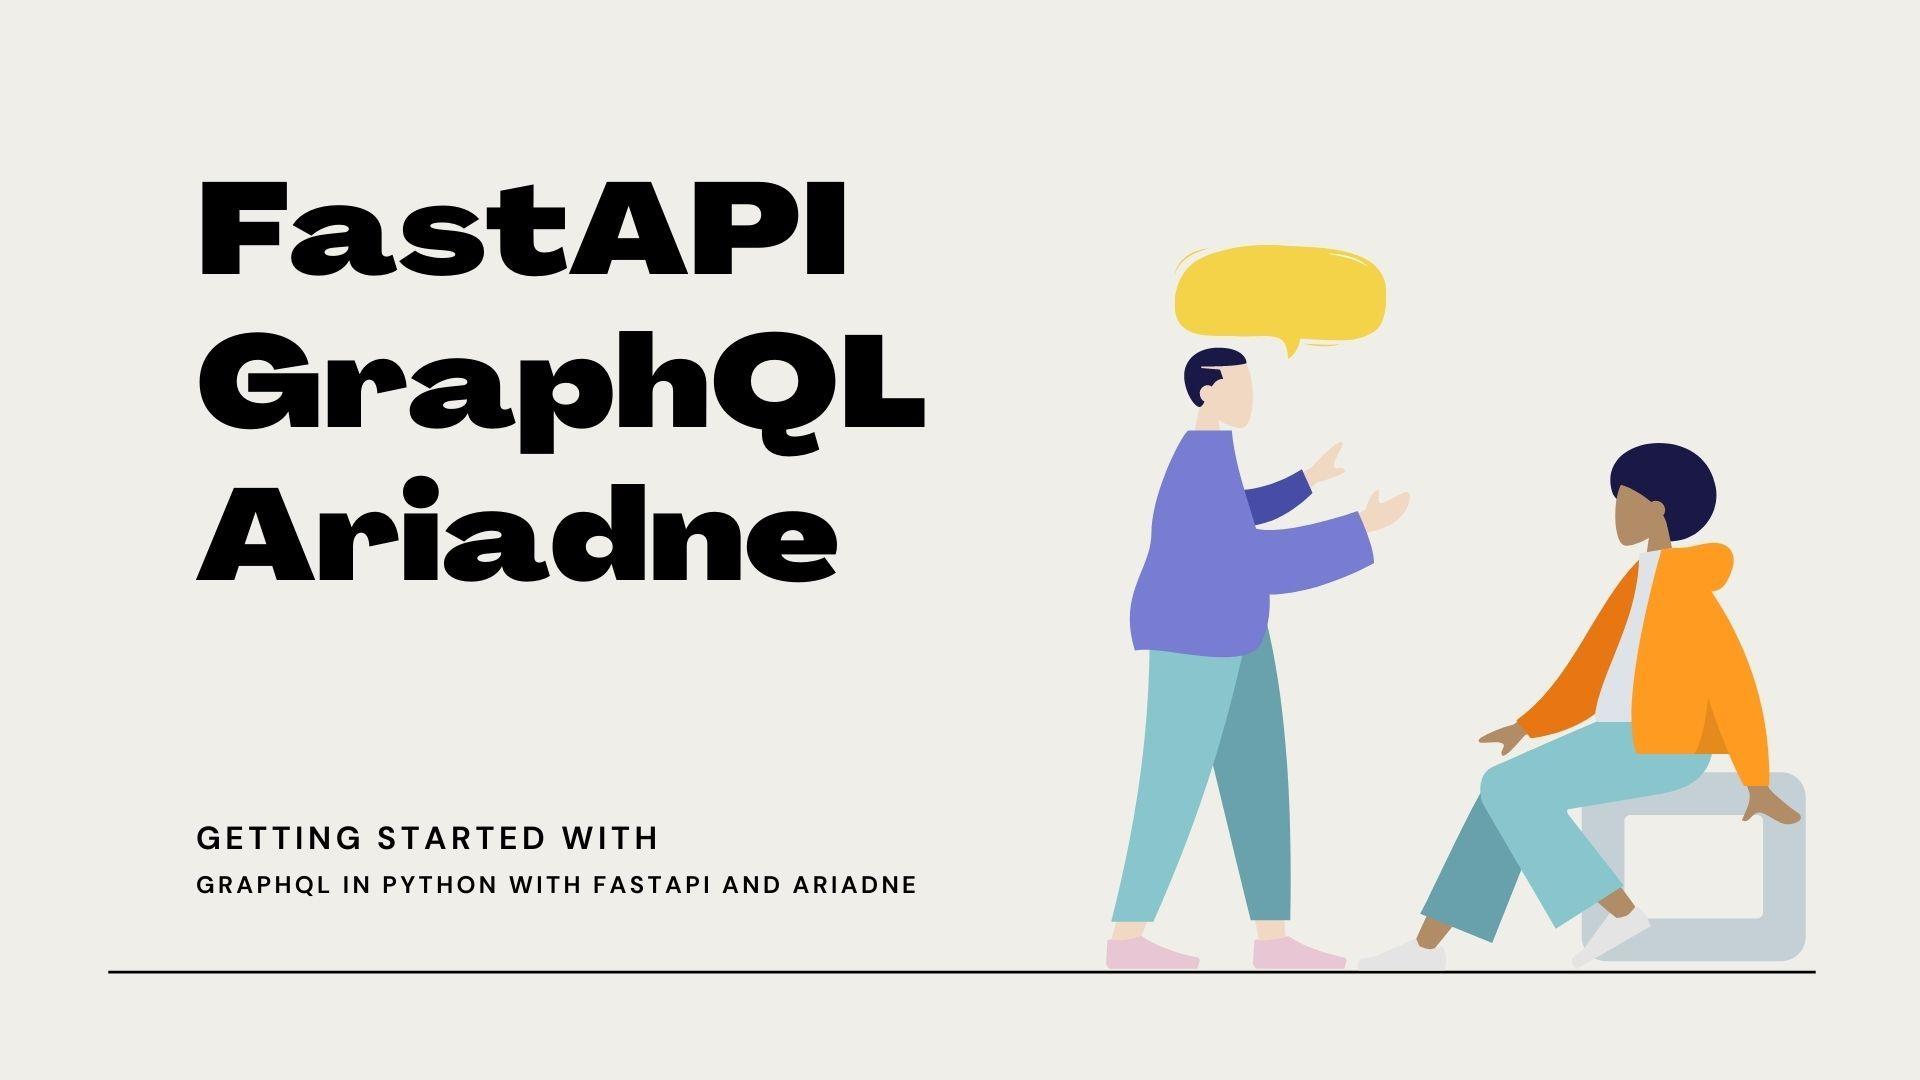 Getting started with GraphQL in Python with FastAPI and Ariadne